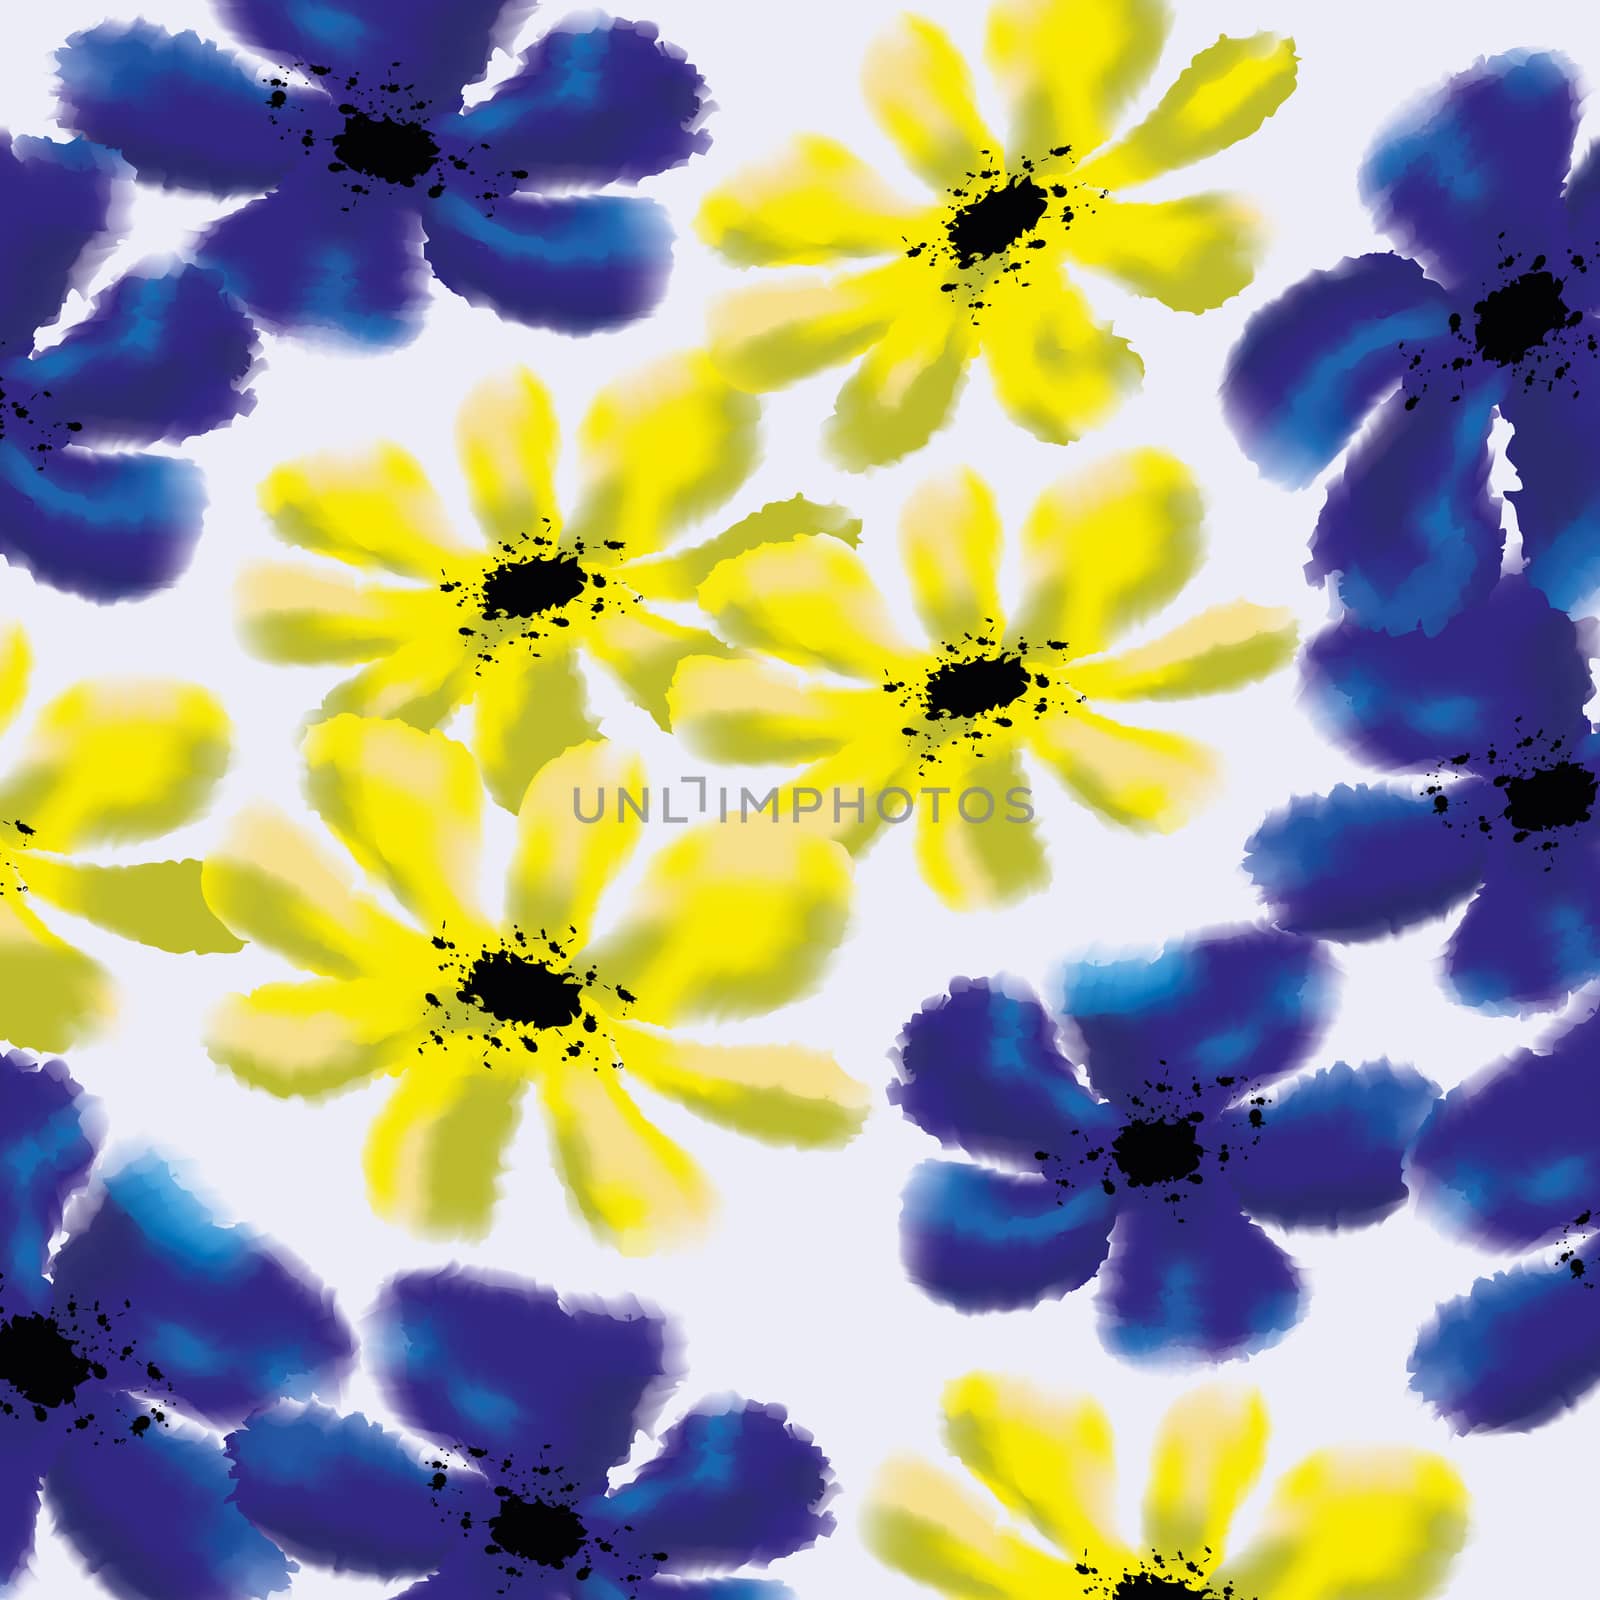 Forget-me-not and cinquefoil floral pattern by Arsgera